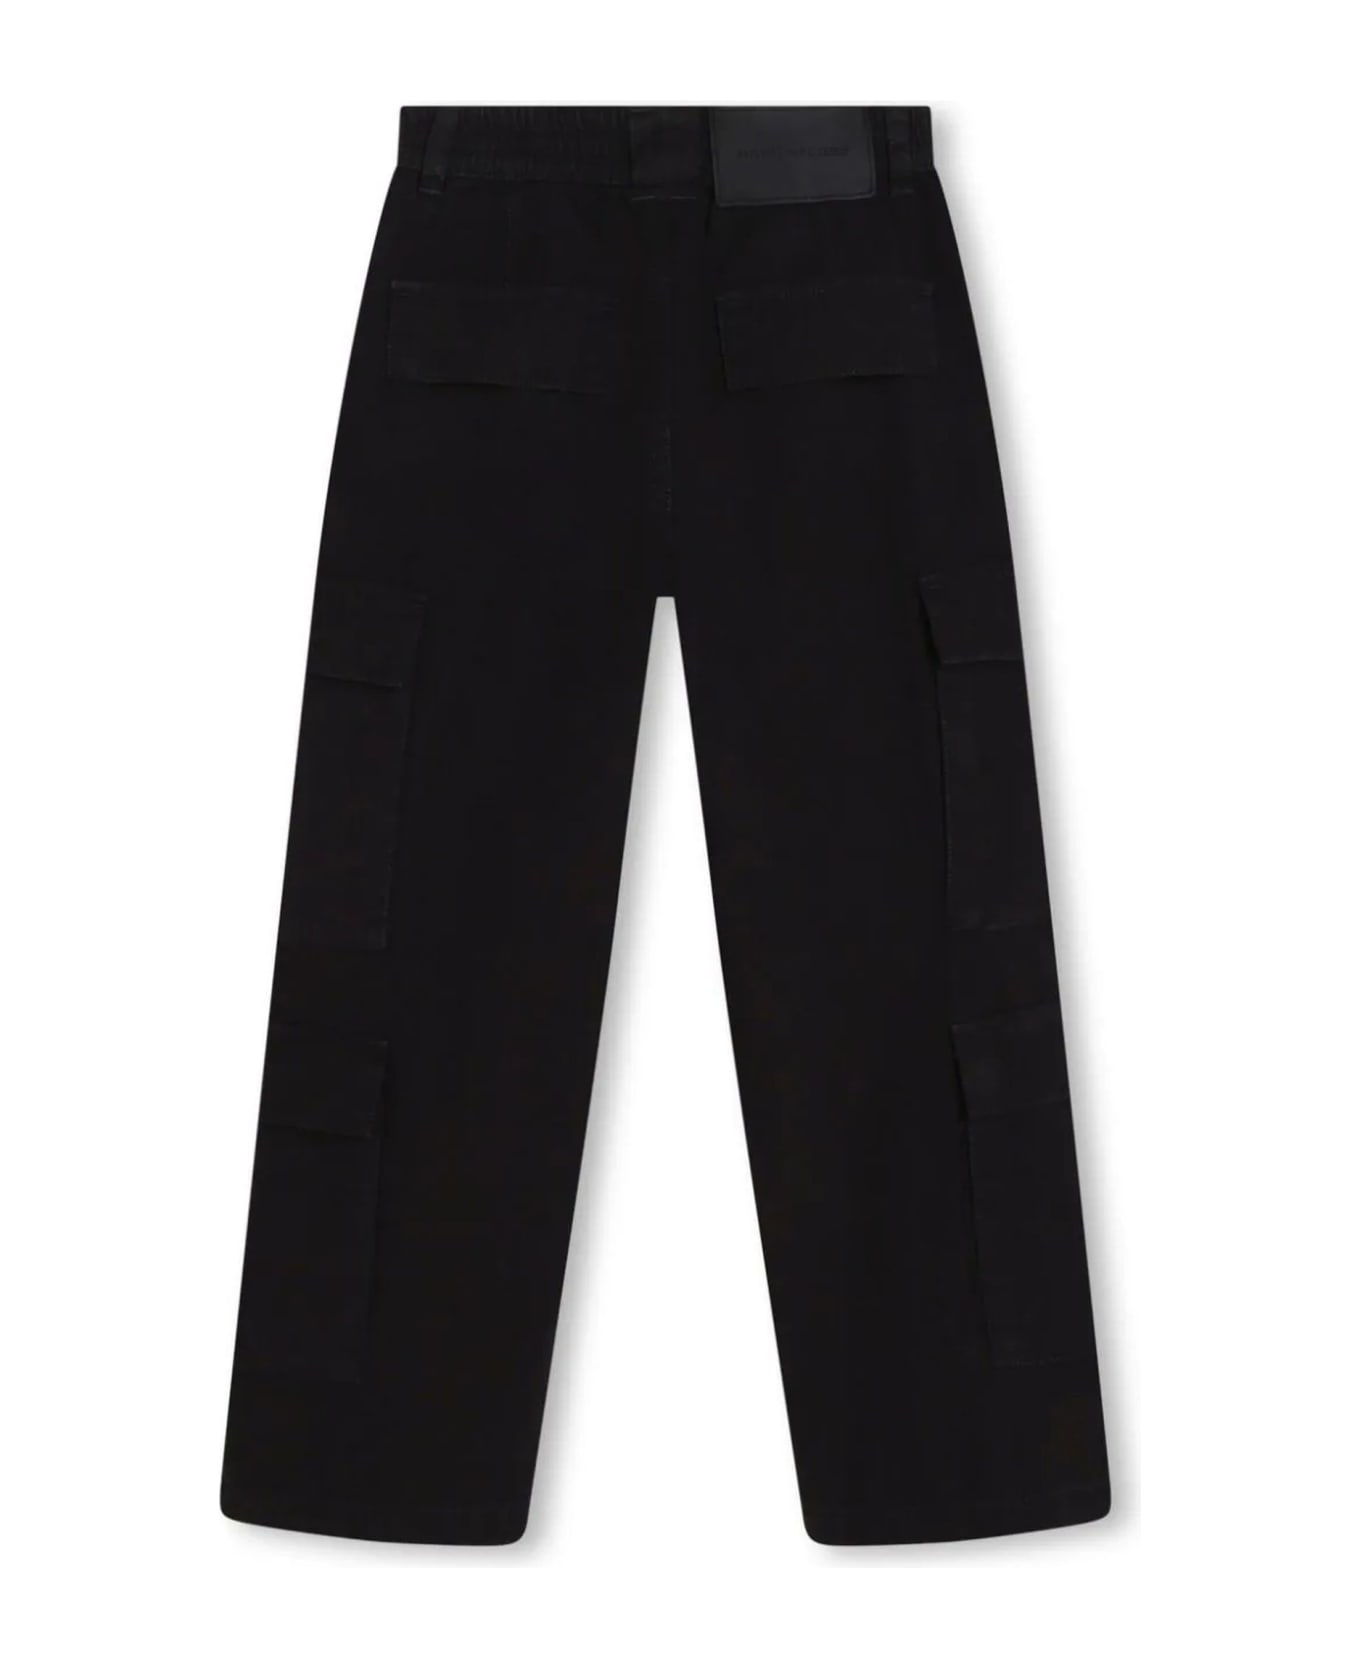 Marc Jacobs Trousers Black - Black ボトムス